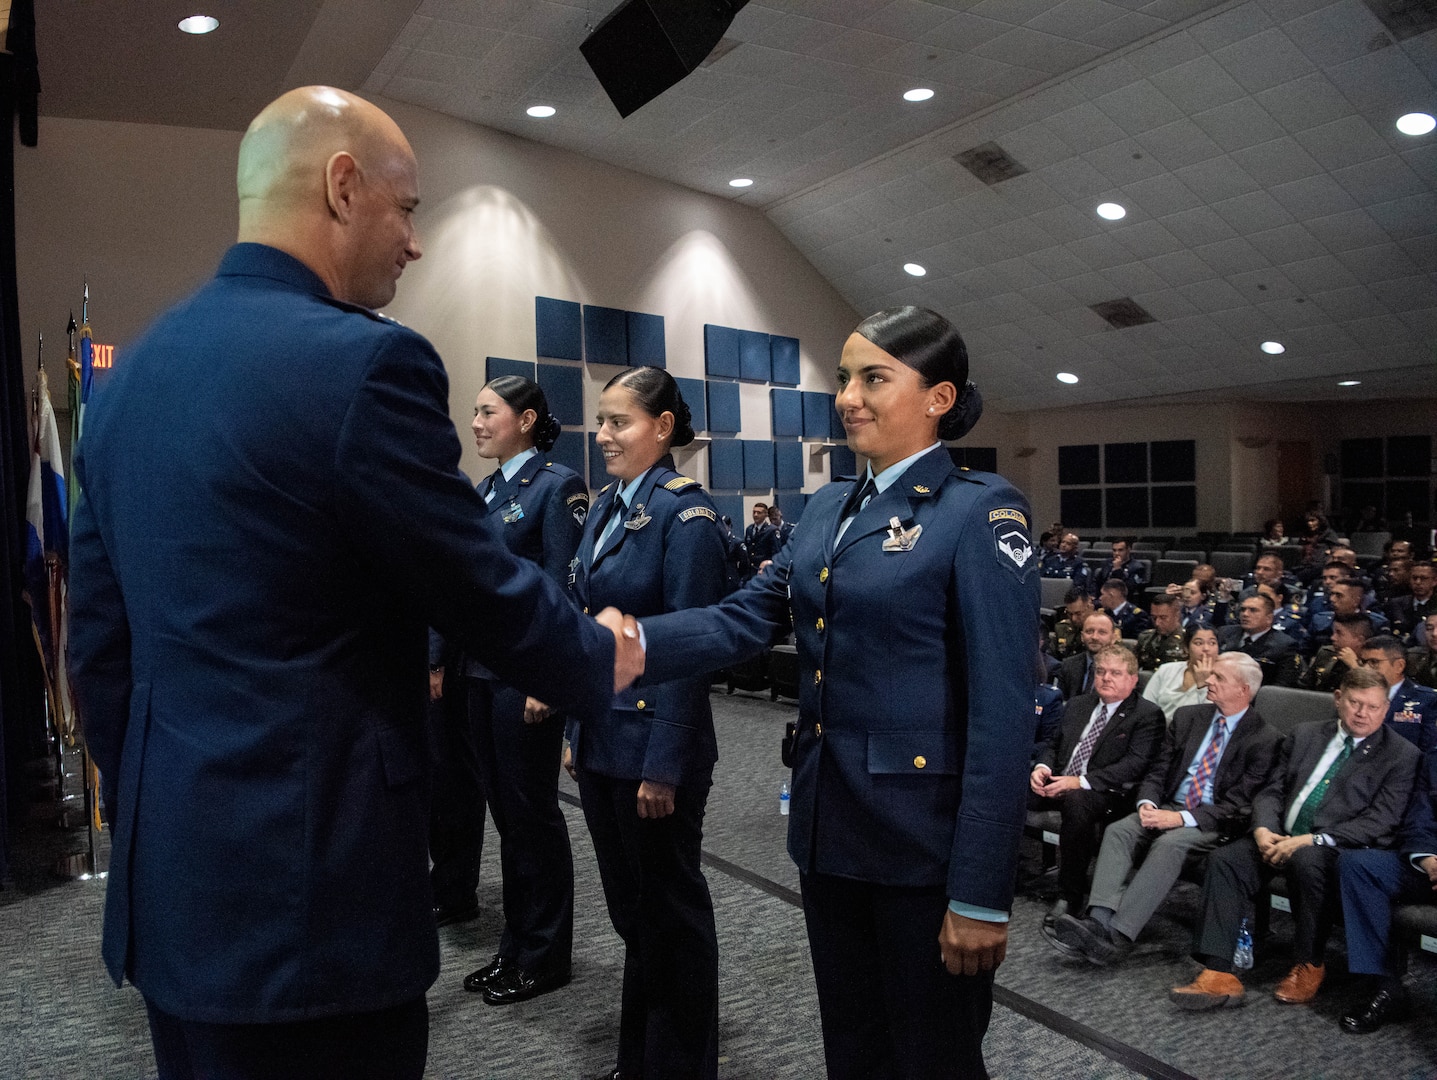 Col. José Jiménez, Jr., commandant of the Inter-American Air Forces Academy, shakes hands with an international military during the Academy’s graduation ceremony at Joint Base San Antonio-Lackland, Texas, Dec. 7, 2022. More than 150 international military students from 12 partner nations across Latin America and the USAF graduated during the last training cycle of 2022. (U.S. Air Force photo by Vanessa R. Adame)